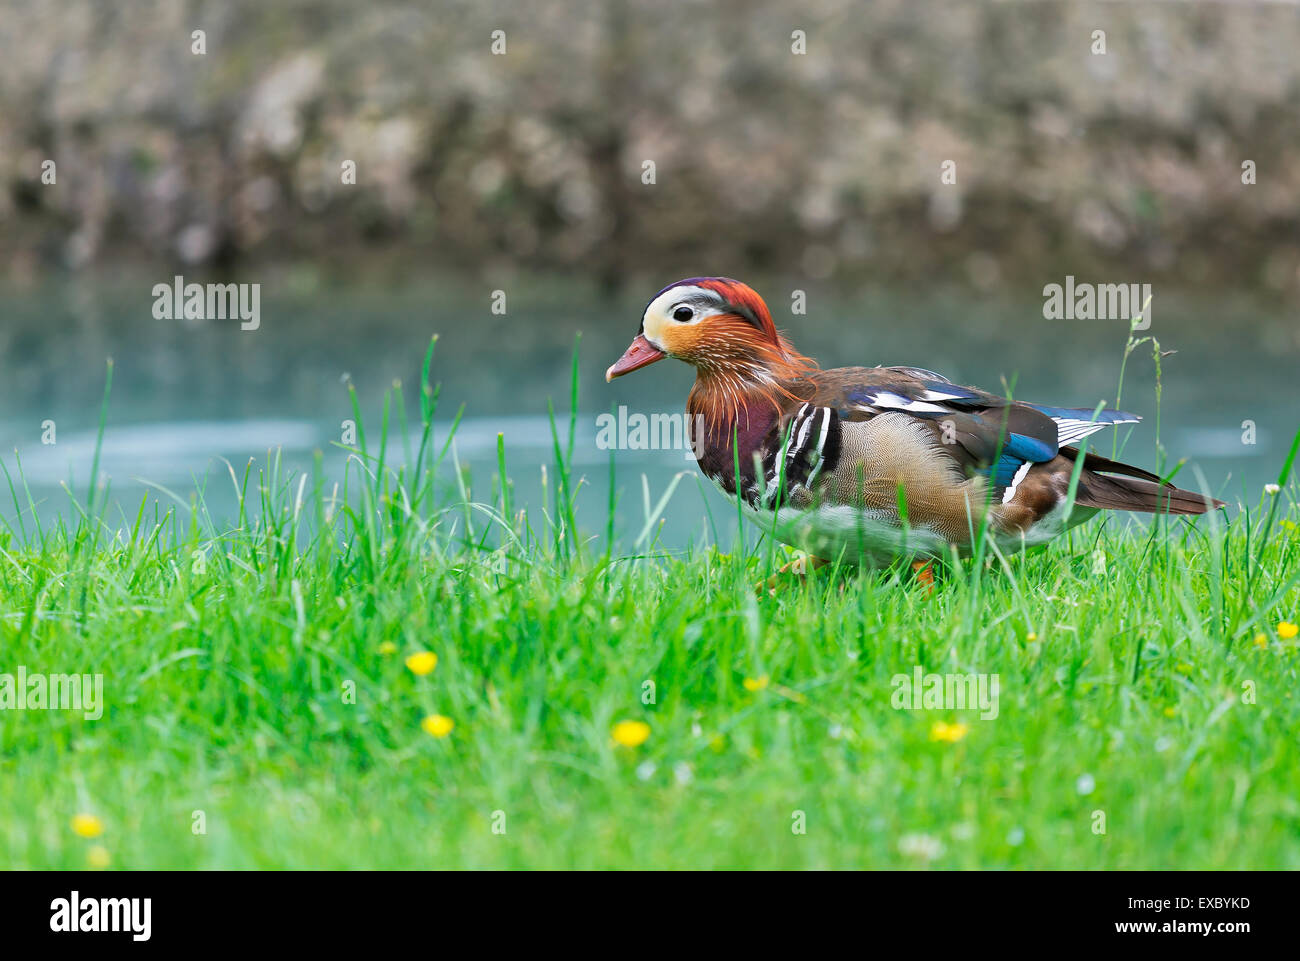 Beautiful colorful duck on the grass near the pond Stock Photo